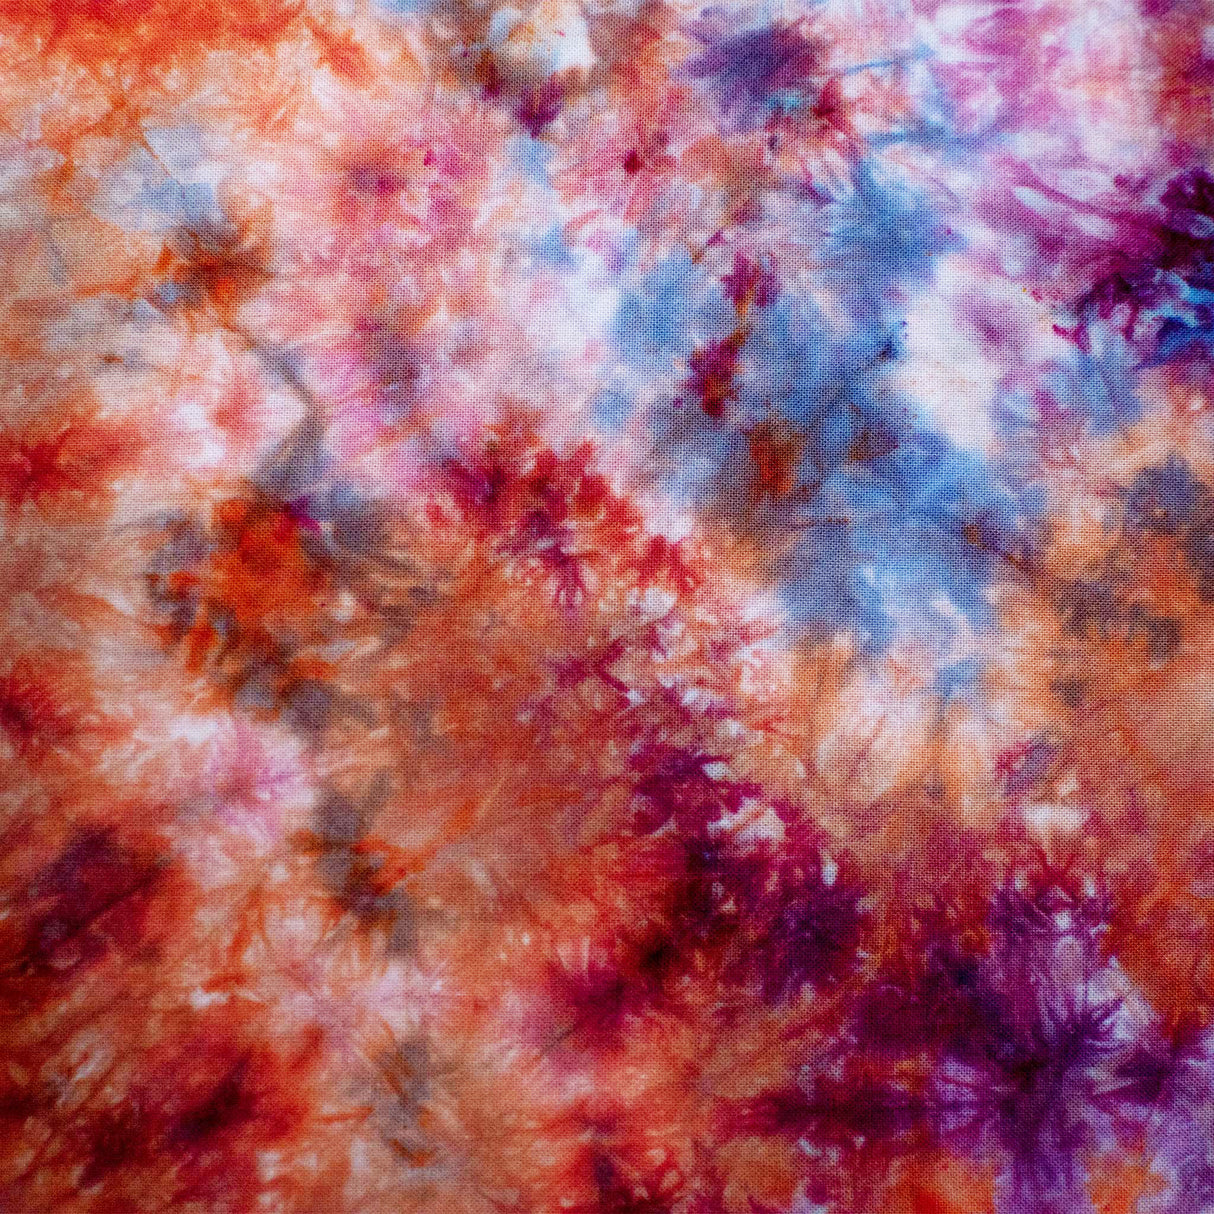 A hand-dyed bandana characterized by its ice-dyed effect, showcasing a storm of warm and cool colors, with prominent shades of rust and lilac resembling a nebula.